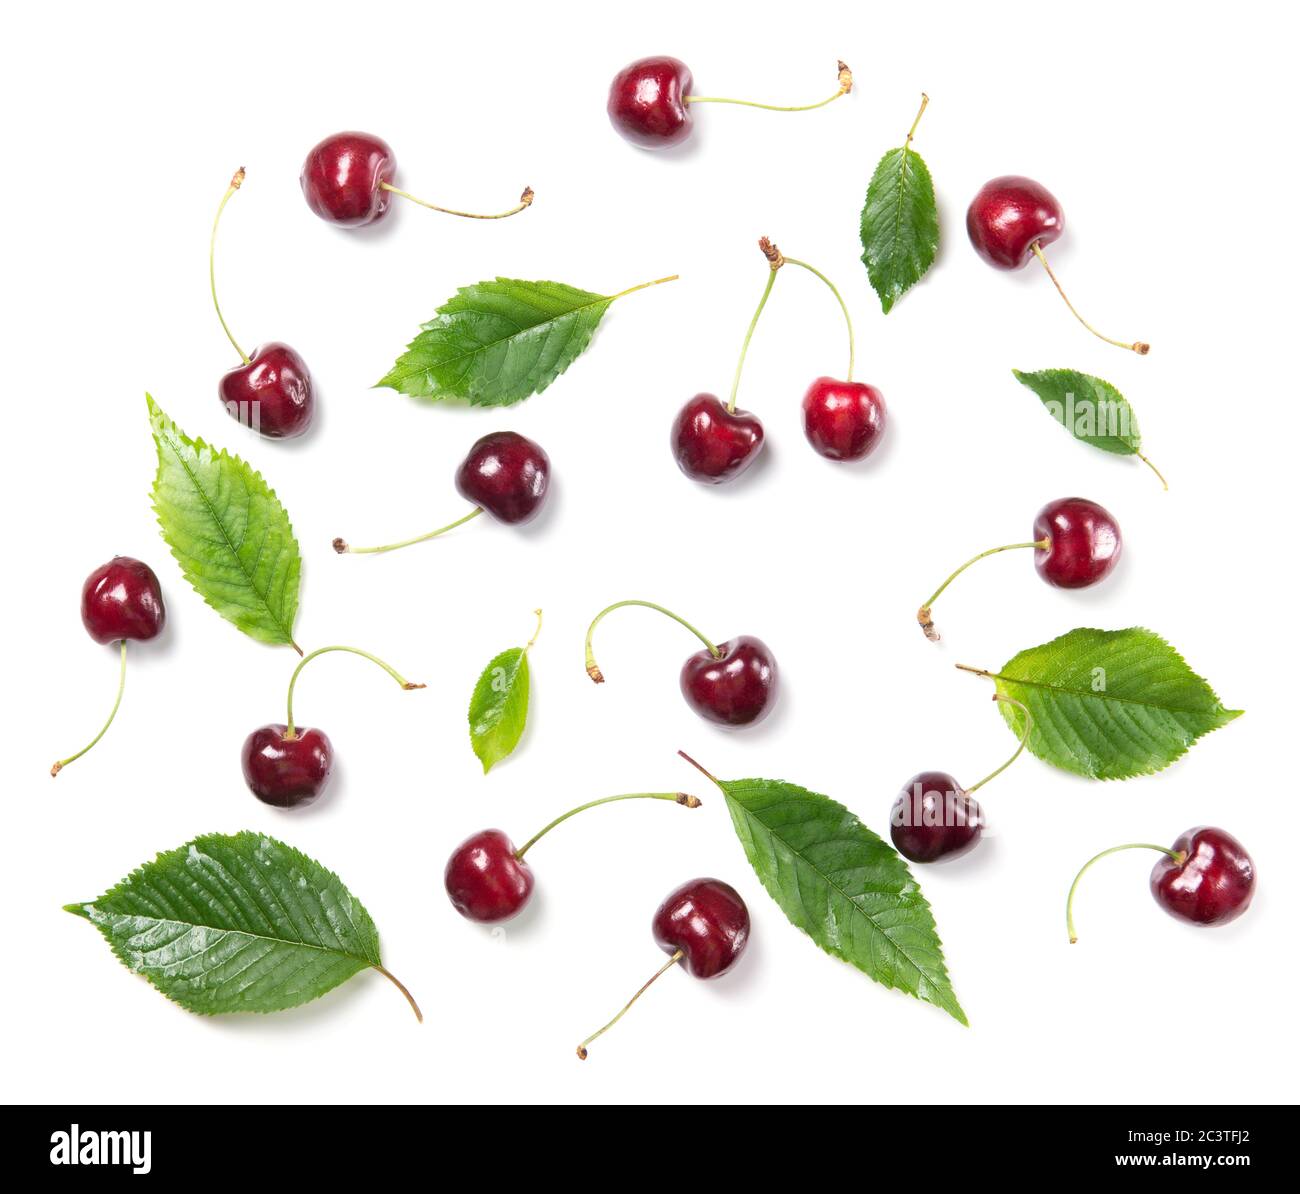 Ripe red cherry berries and cherry green leaves pattern isolated on white background, top view Stock Photo